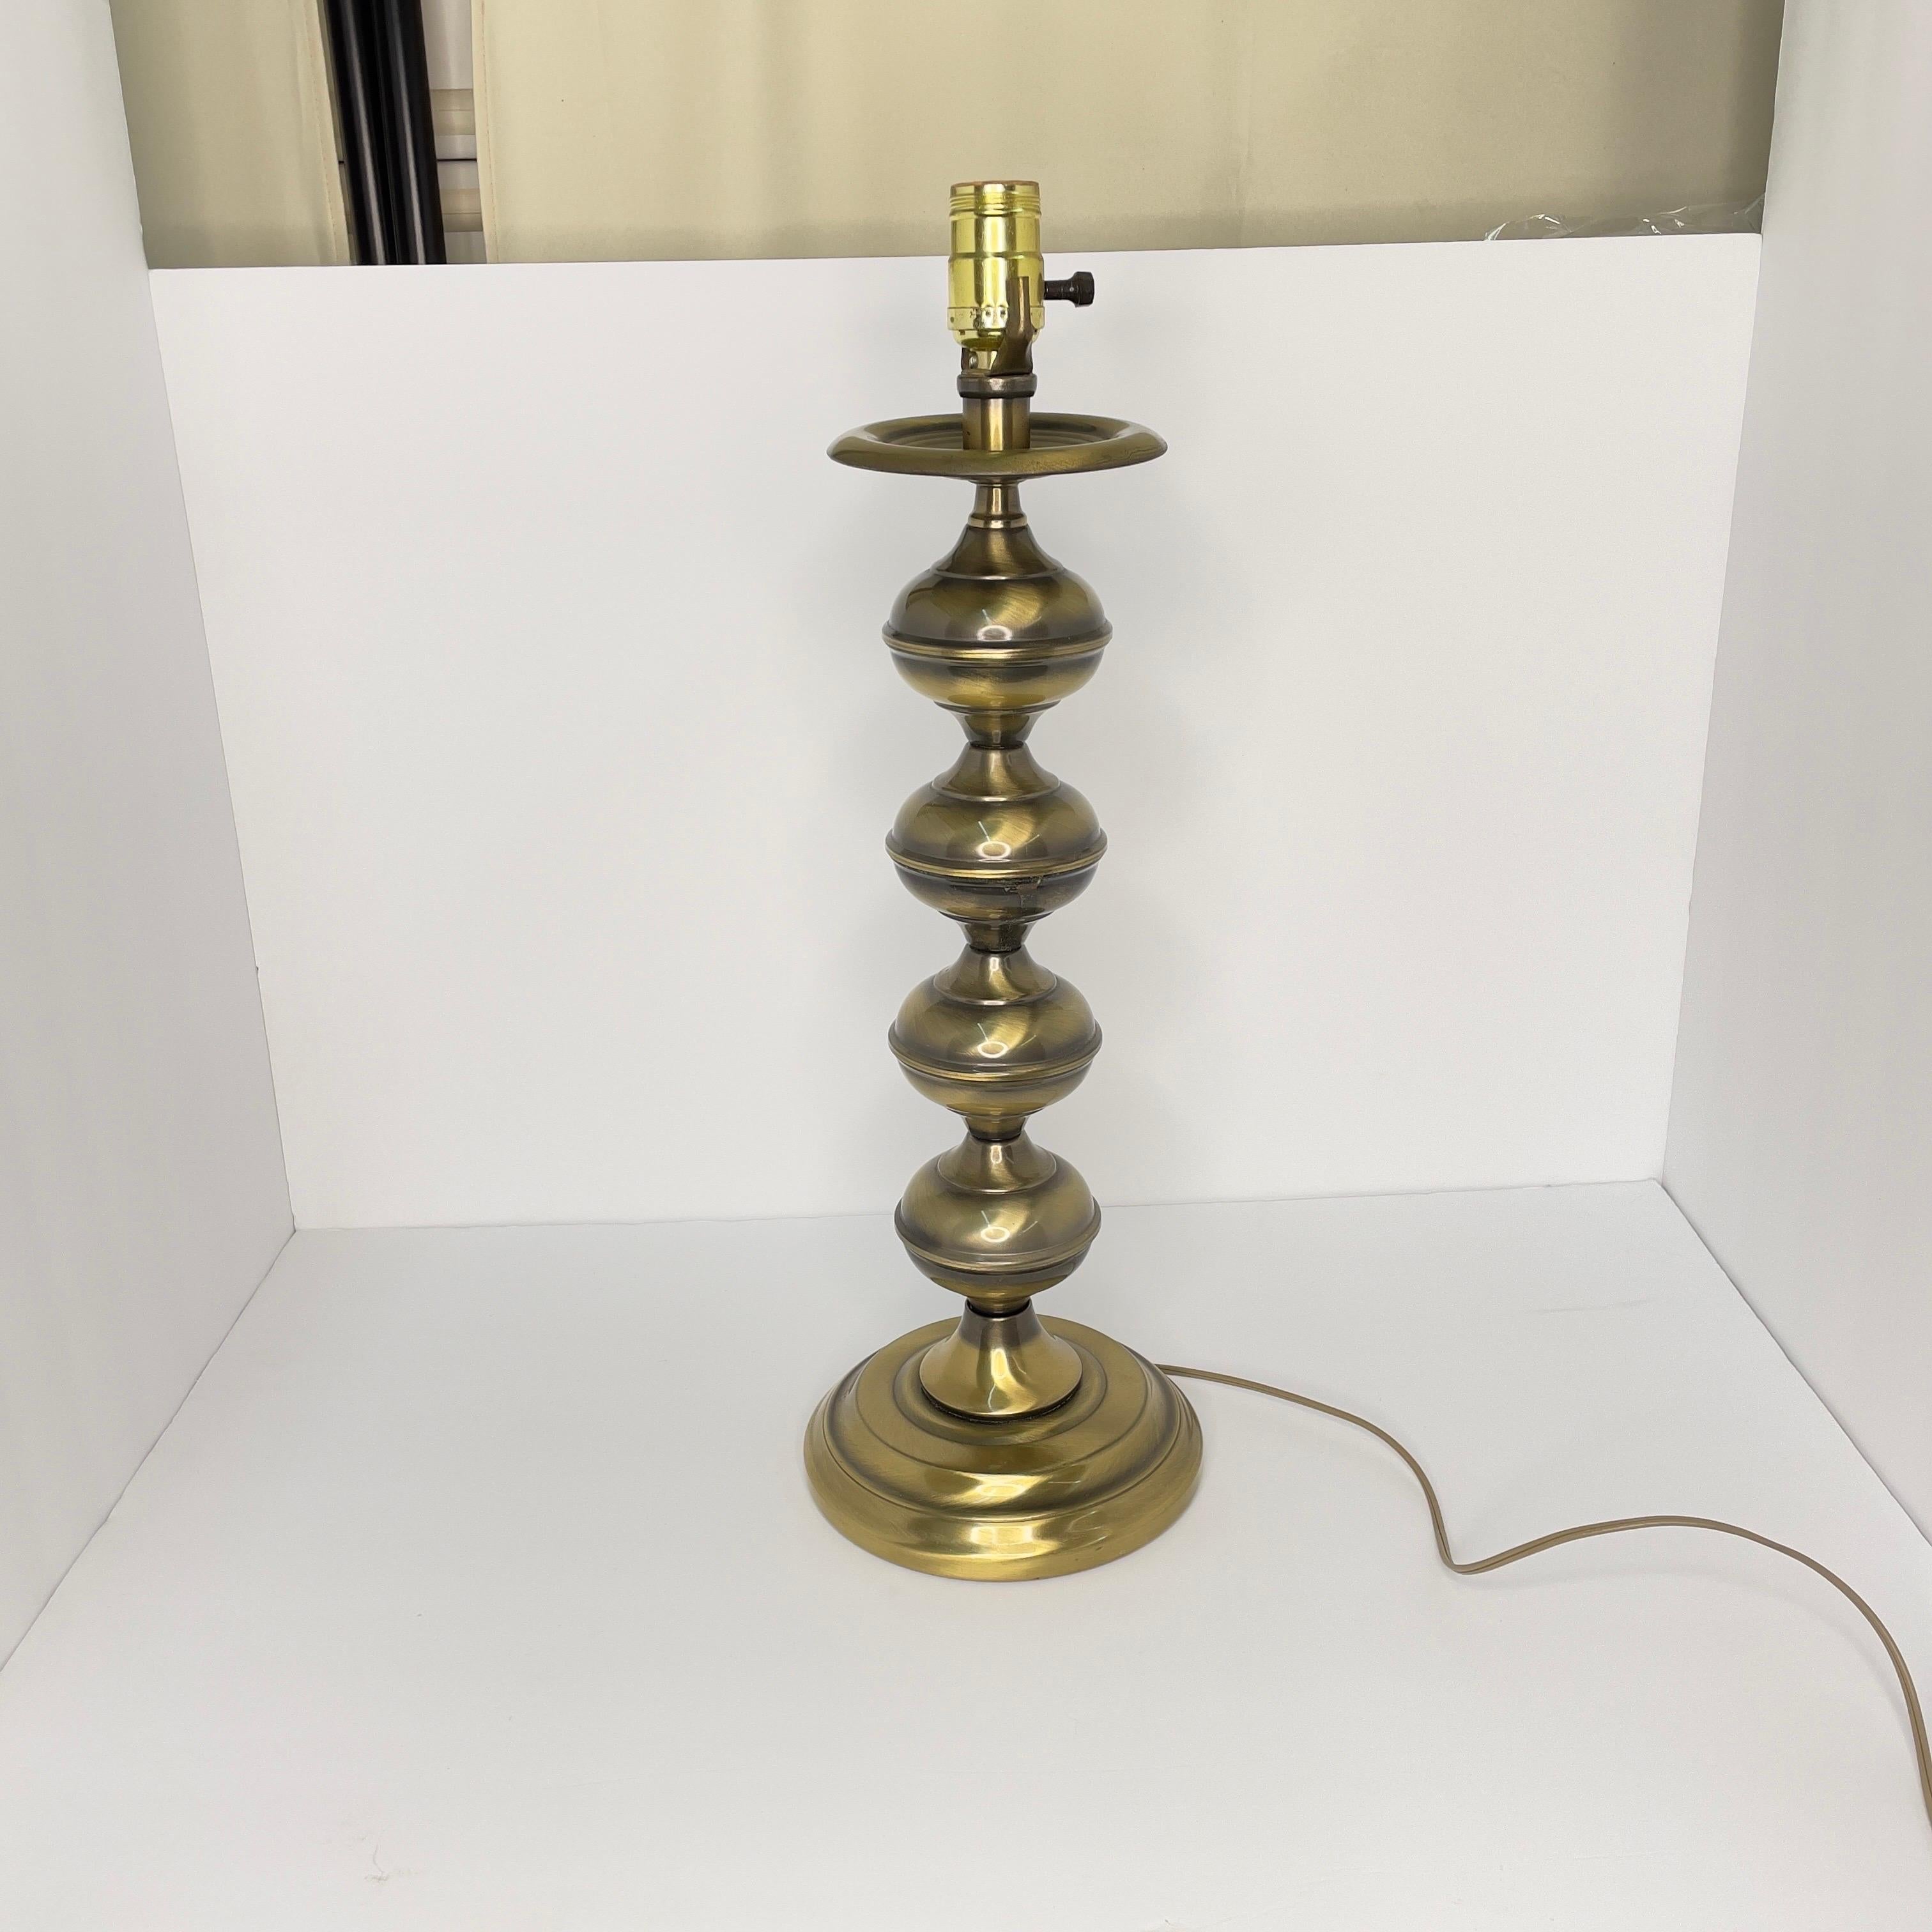 Polished Mid Century Modern Brass Turned Table Lamp With Shade- 2 Pieces For Sale